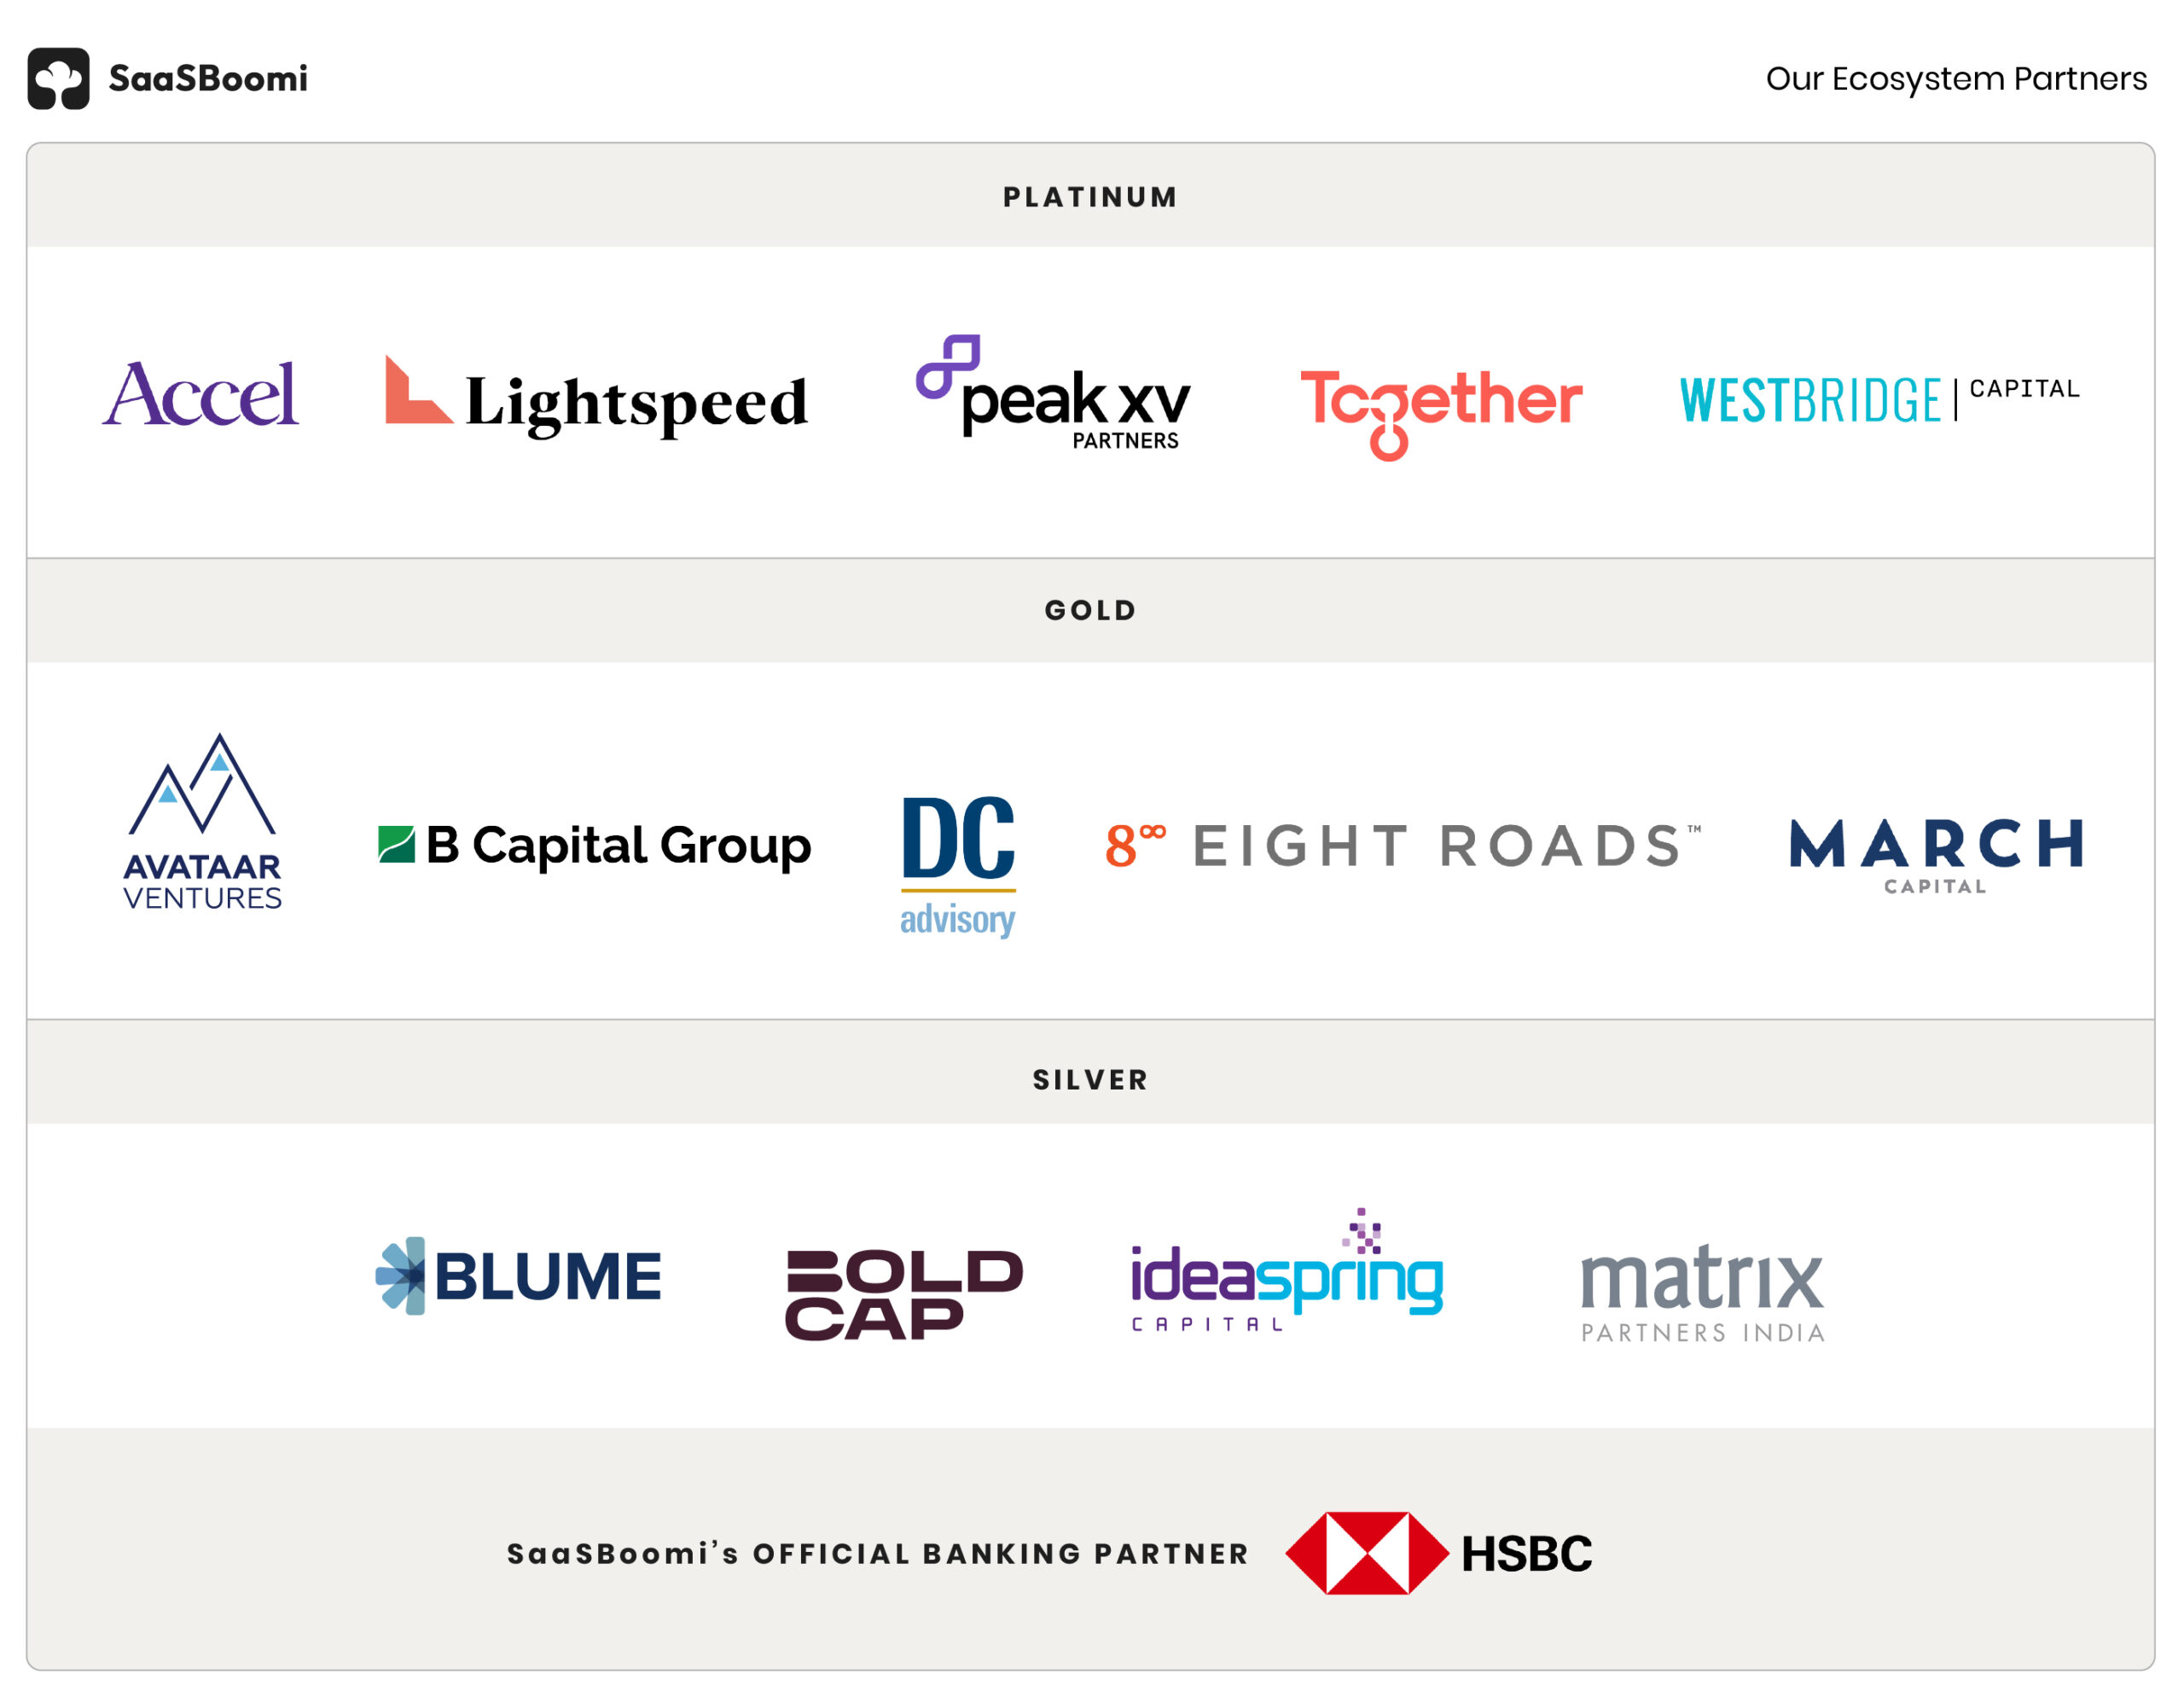 Here is the full list of SaaSBOOMi Ecosystem Partners for 2023-24: